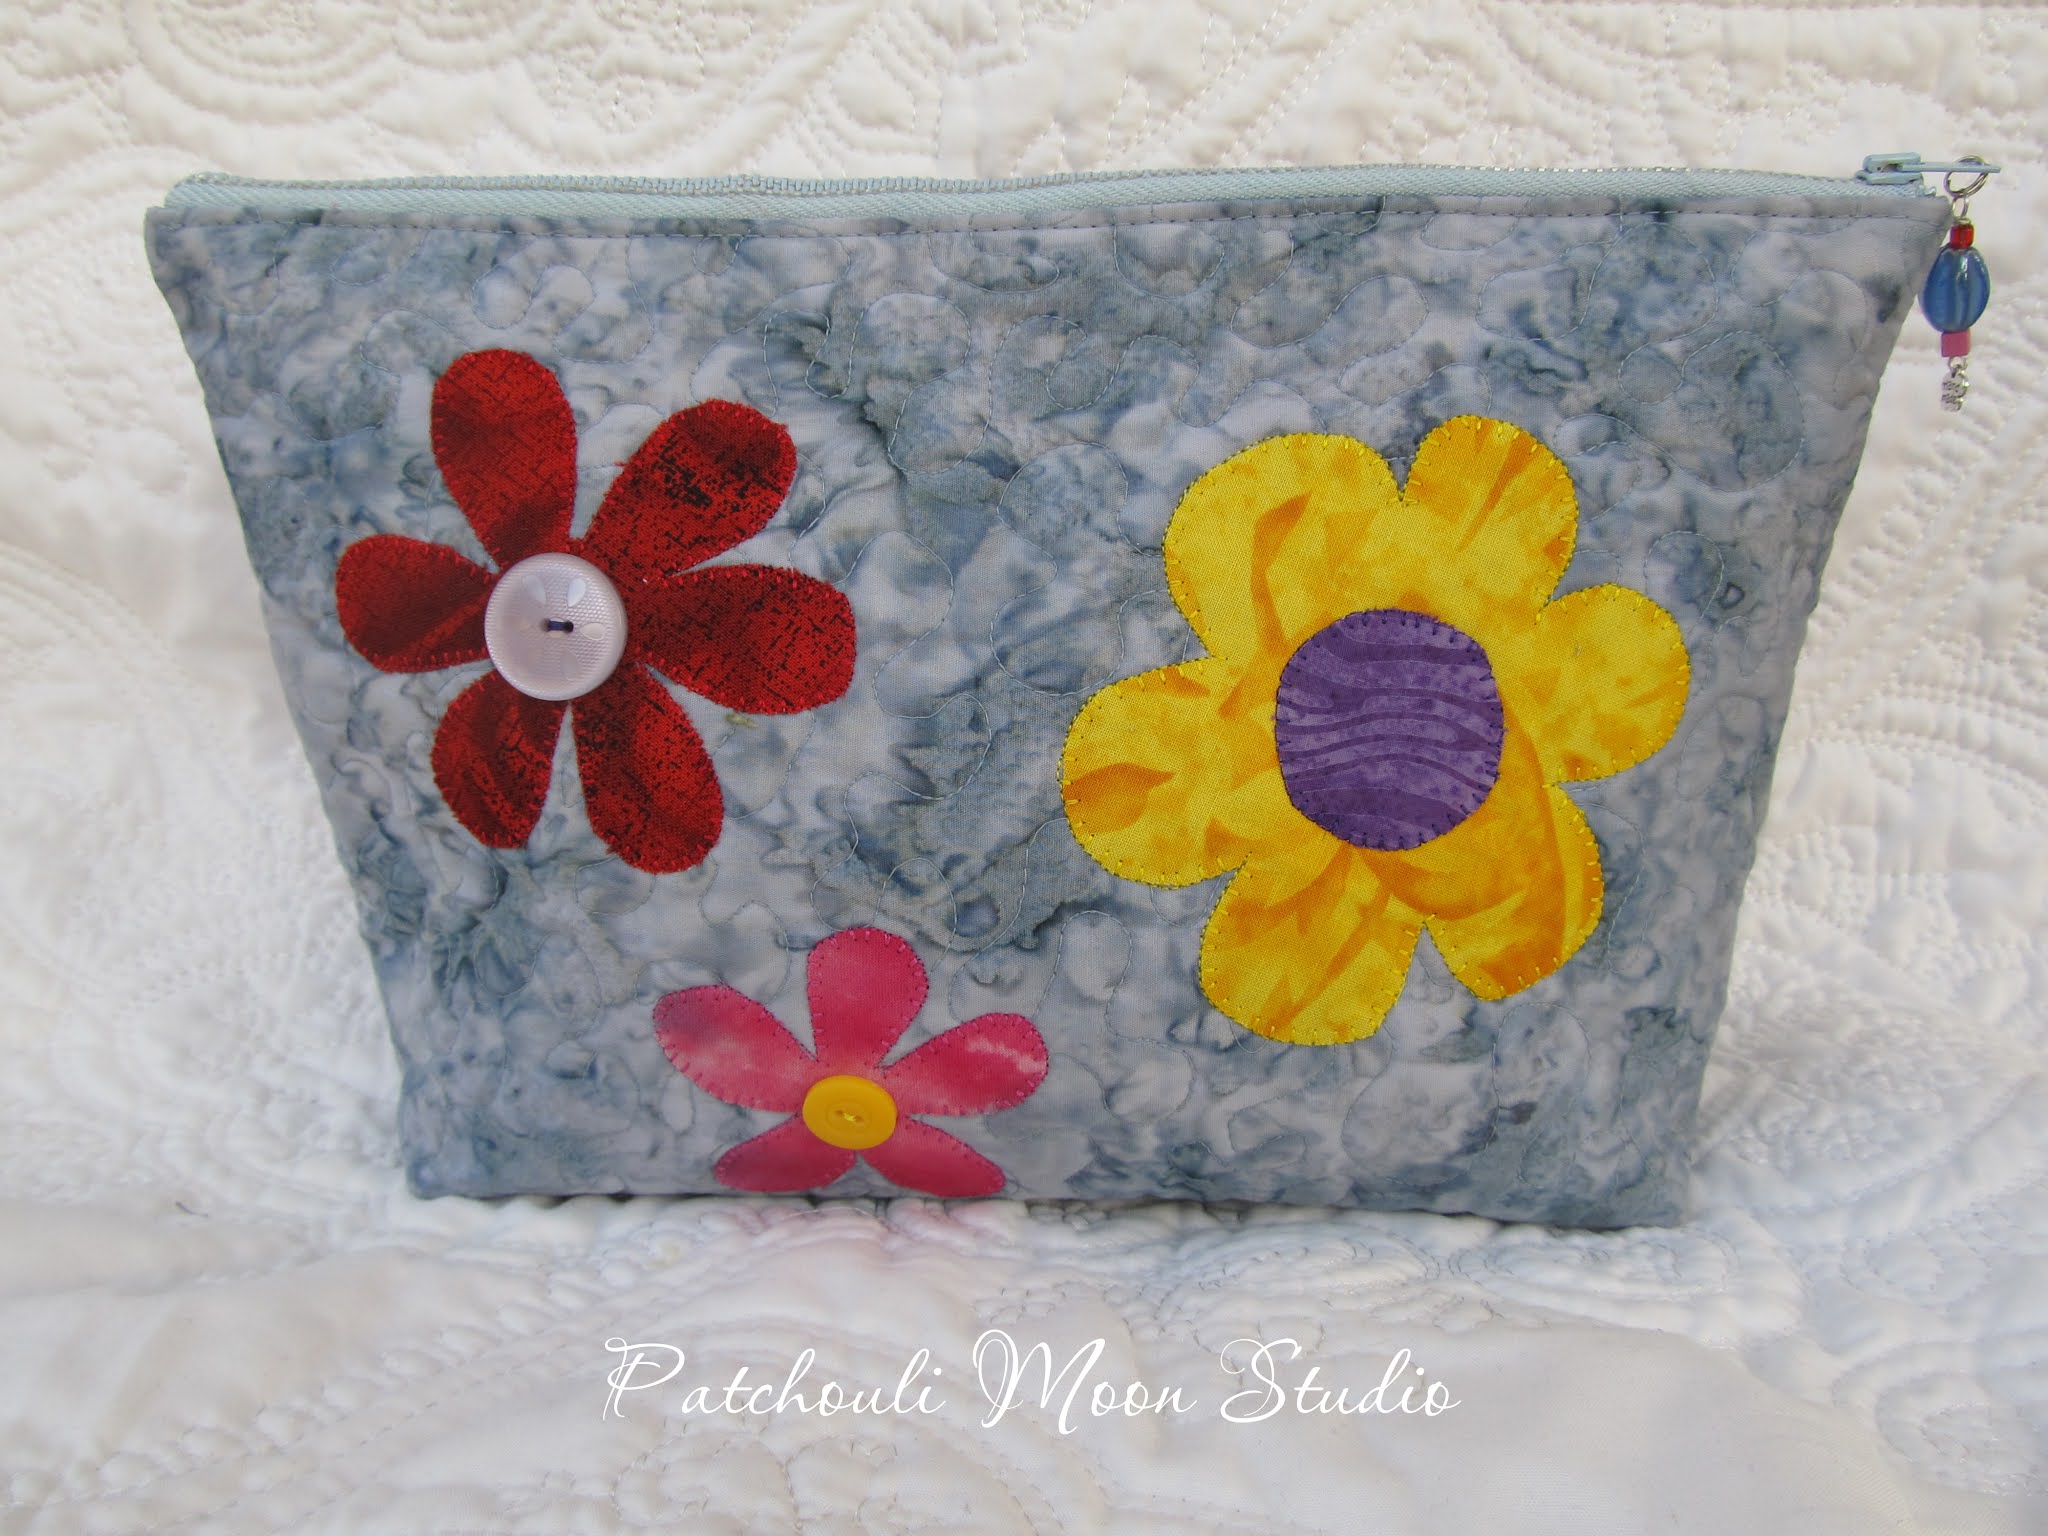 Patchouli Moon Studio: Quilted Zipper Pouch with Flower Applique